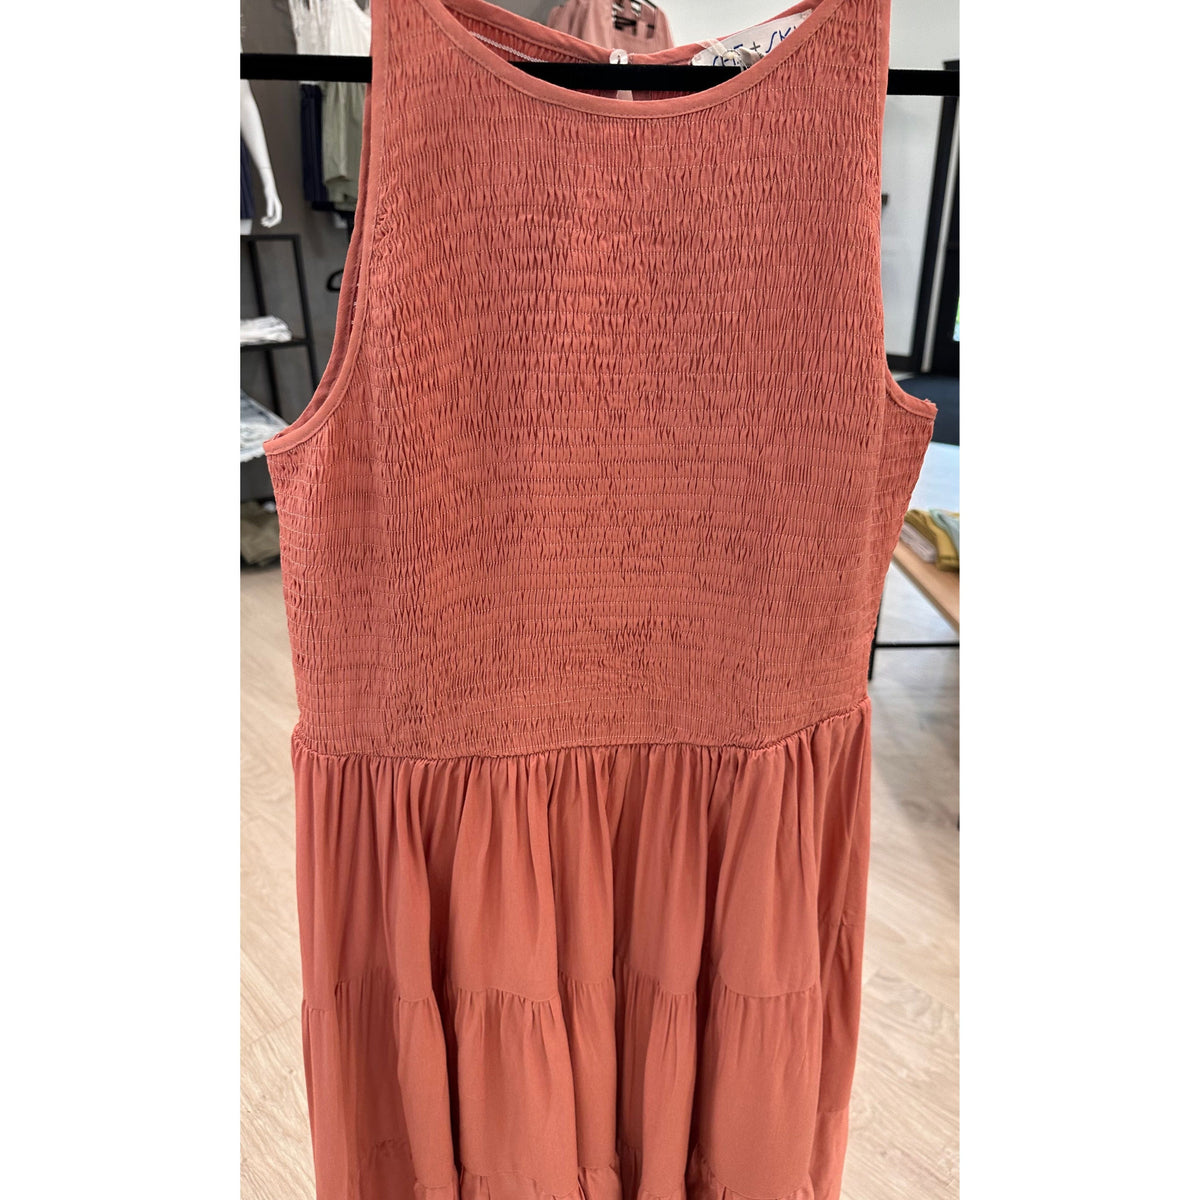 Smock tired sleeveless halter dress in Coral - women's clothing